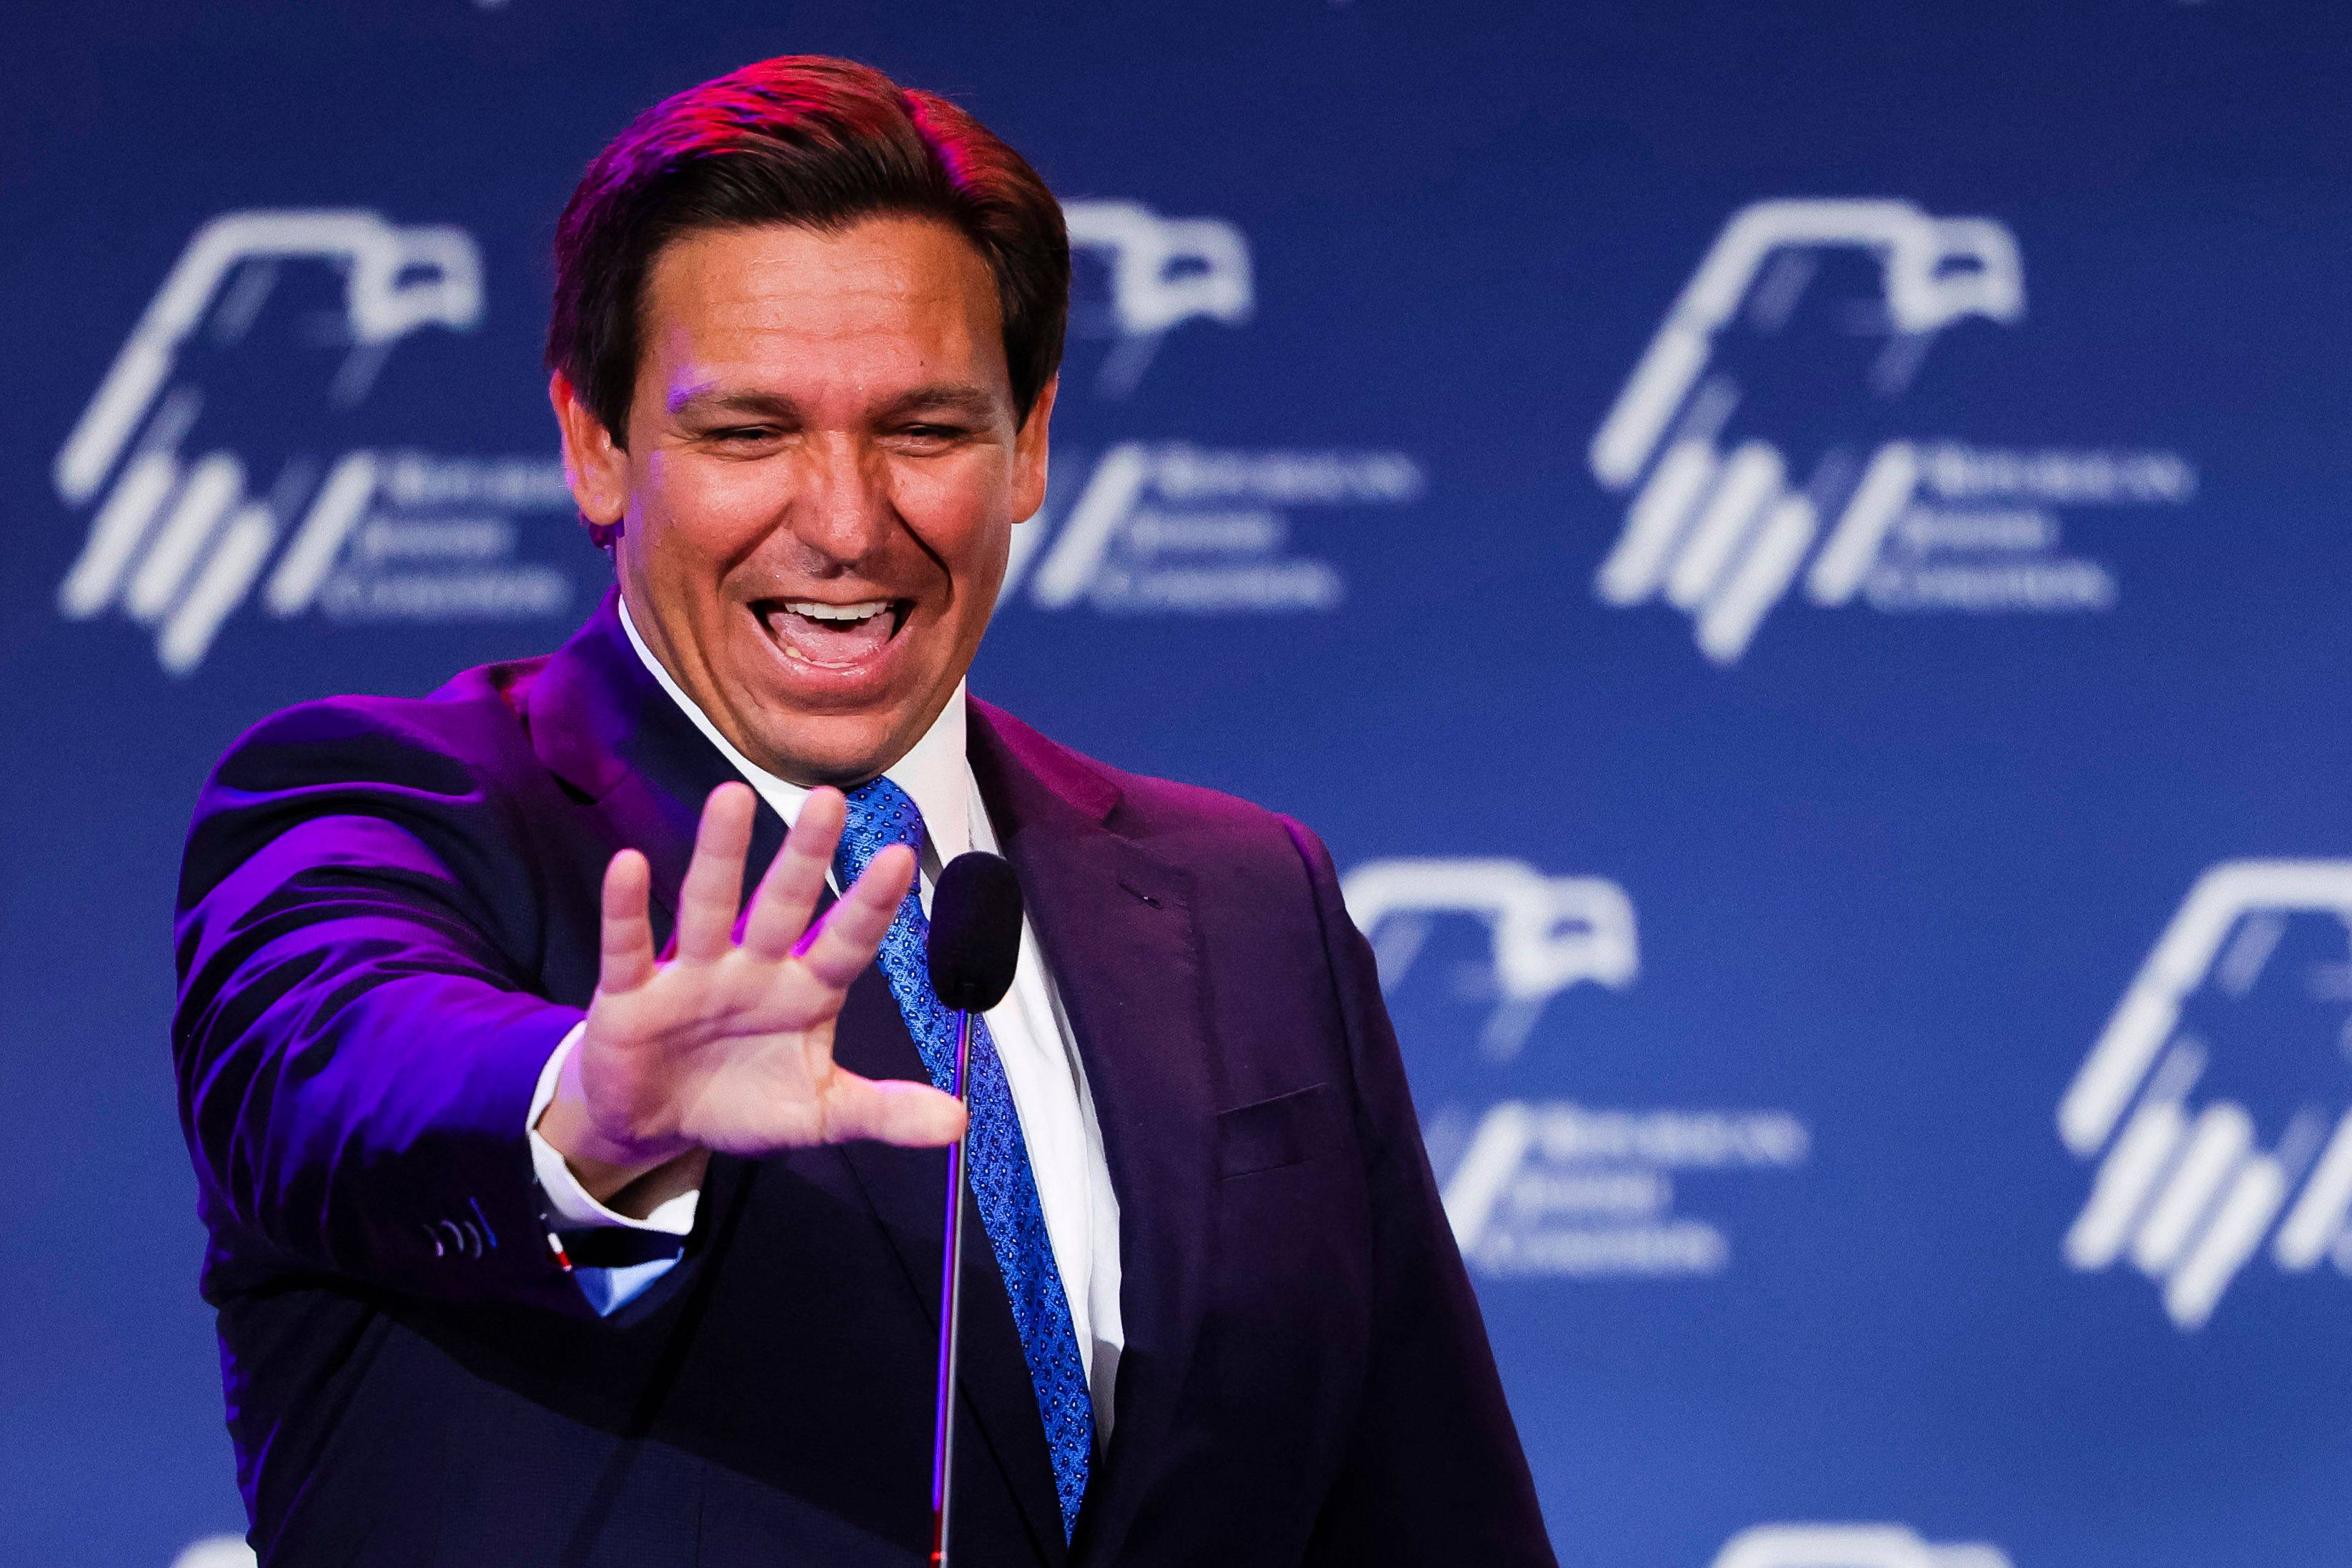 Republican Florida Governor Ron DeSantis waves to supporters at an event in Las Vegas in November 2022. Photo: AFP